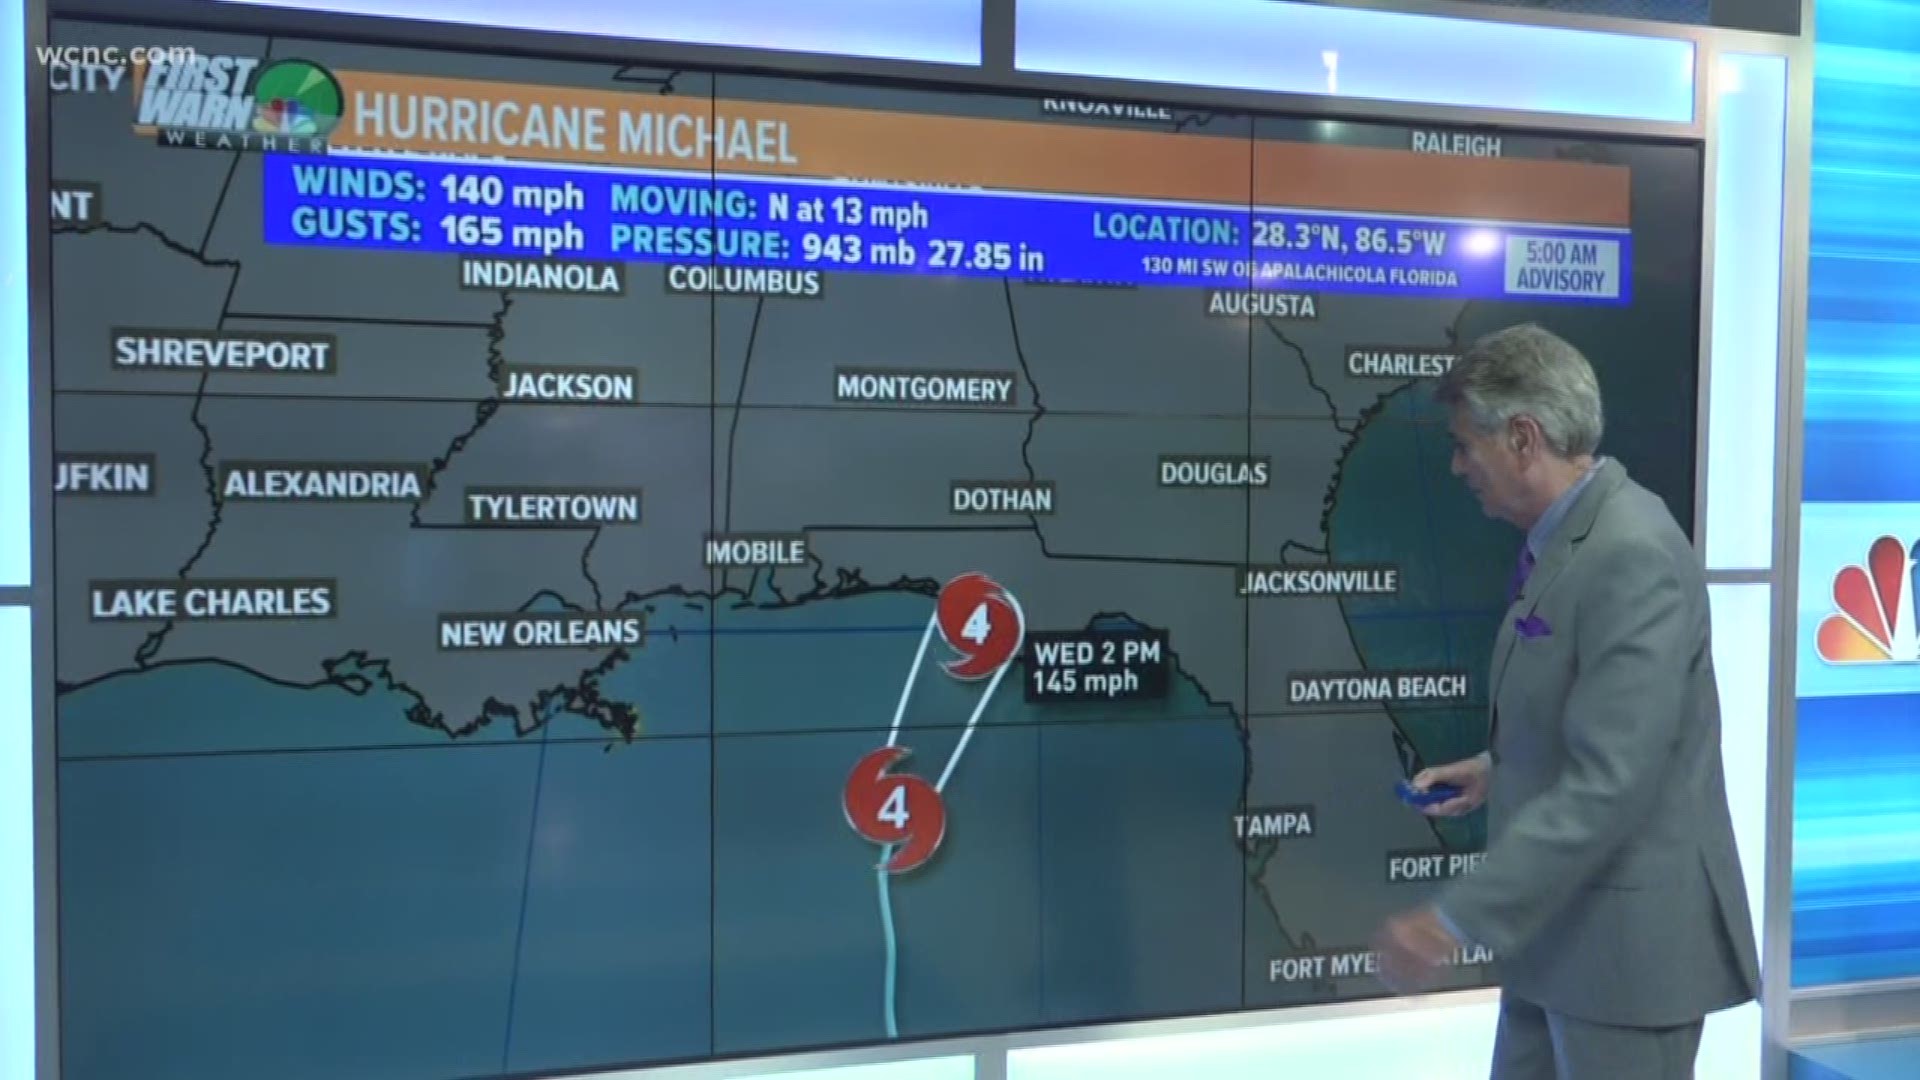 Hurricane Michael is a dangerous Category 4 hurricane with gusts of 165 mph as it bears down on the Florida panhandle. Life-threatening storm surge and catastrophic damage are expected when Michael makes landfall.